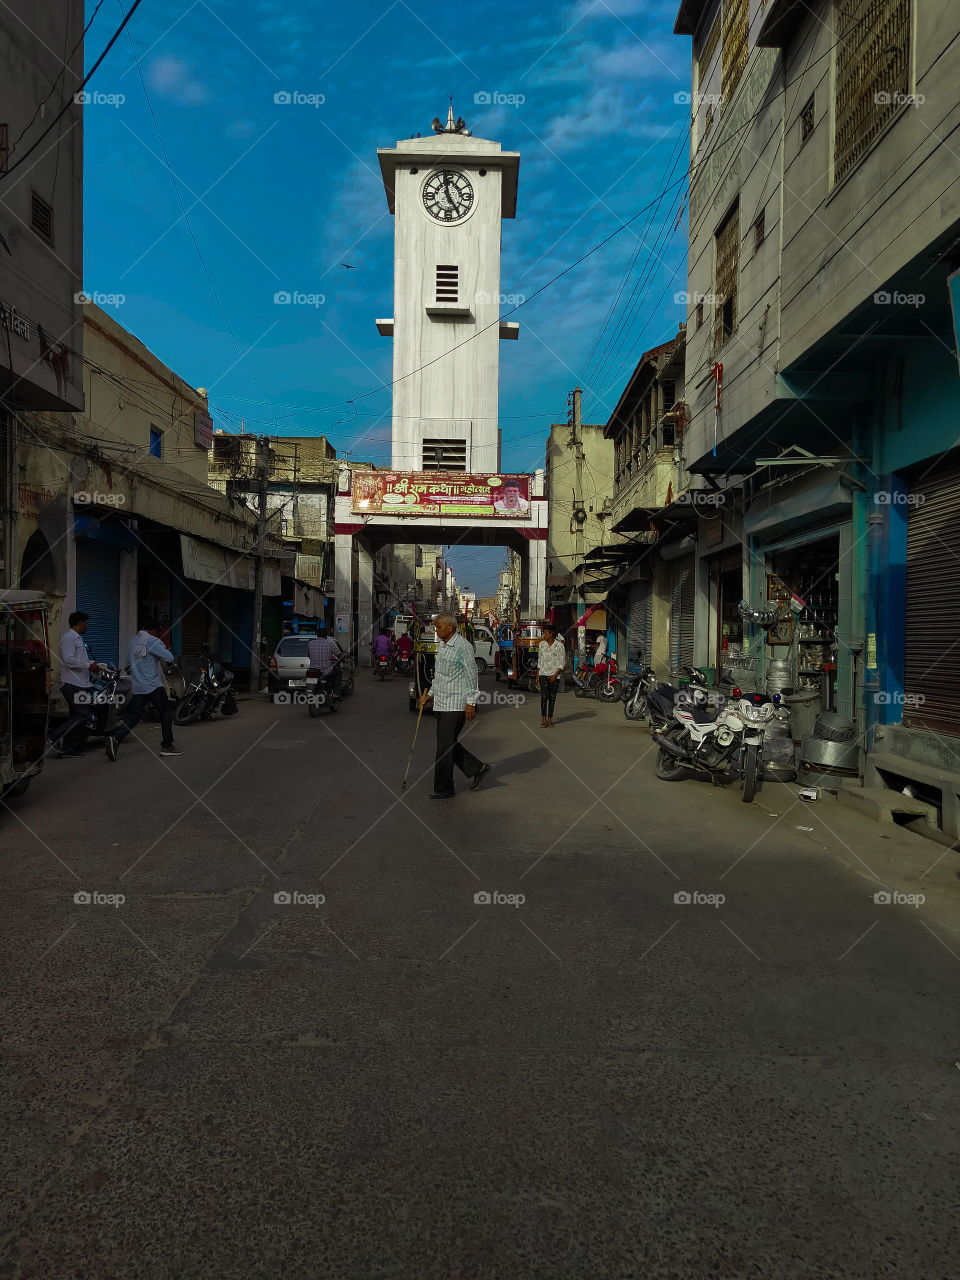 Asia best Clock tower, Because this hour pass four way from below the house,And it stands by four pillars.It is the only chime of Asia down which leaves four way....😇😇😇😇